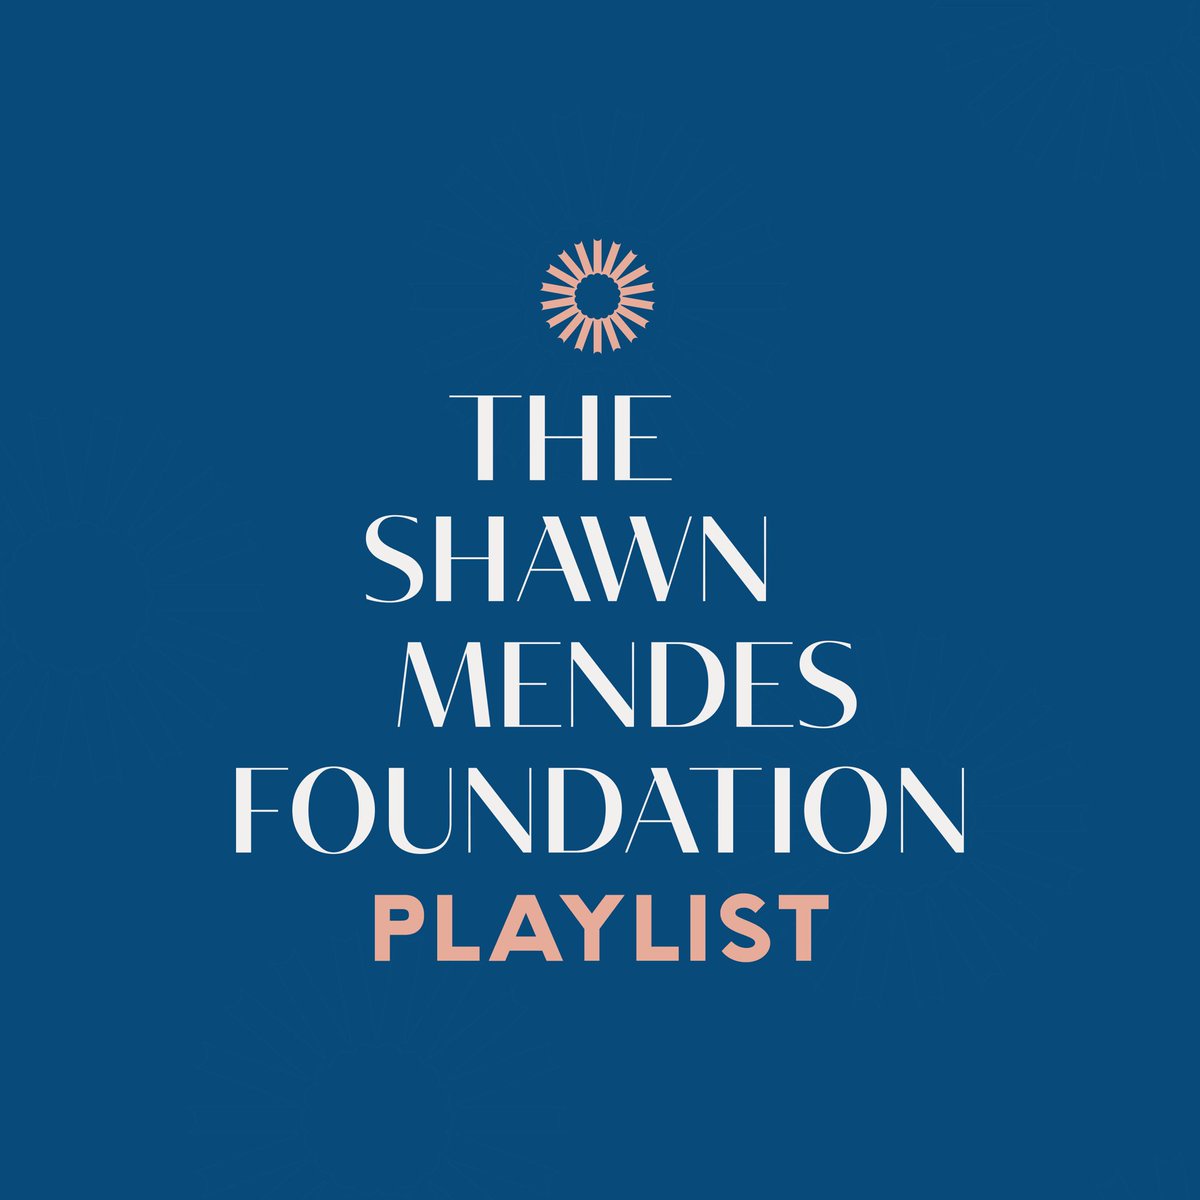 Curated by inspiring youth changemakers using their voices to highlight issues important to them, & we'll be donating to causes of their choosing. We urge you all to use your voice & register to vote. Listen now & register at playlist.shawnmendesfoundation.org or by texting 'SMF' to 954-954